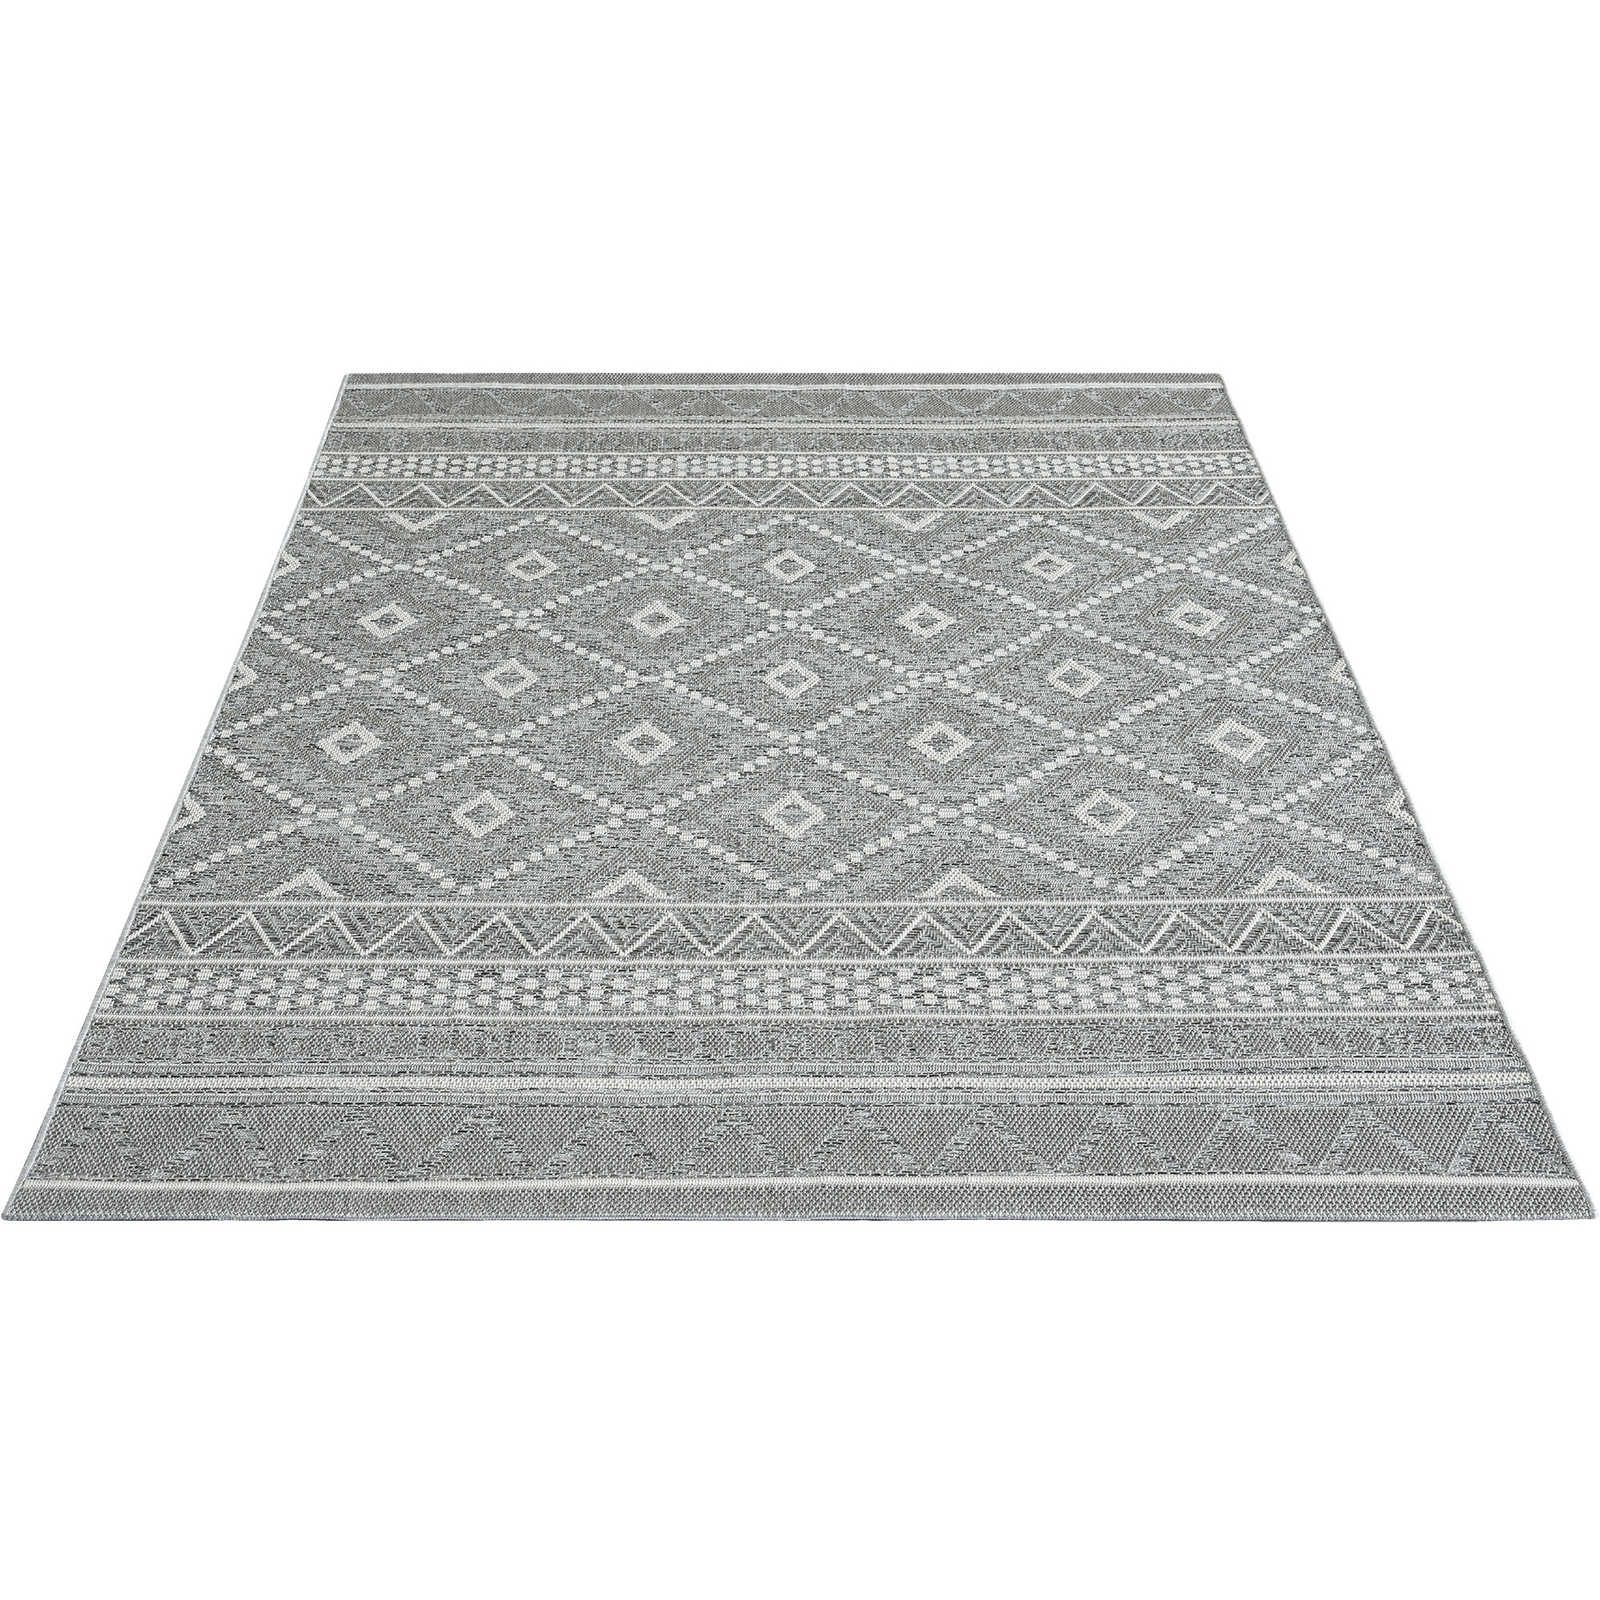 Patterned Outdoor Rug in Grey - 280 x 200 cm
